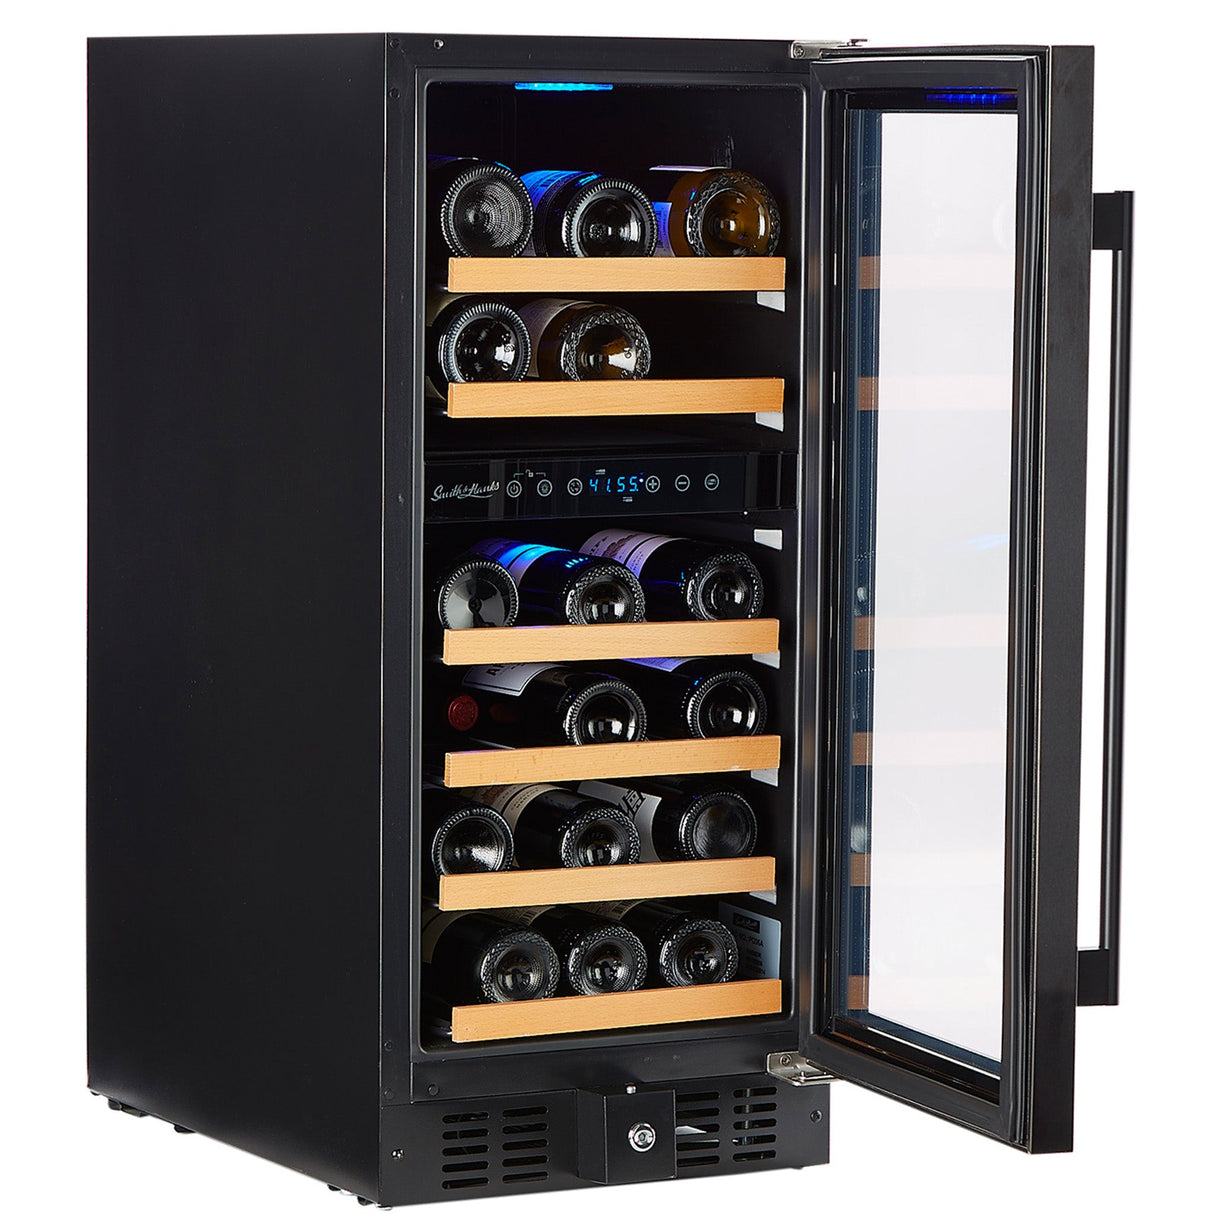 Smith and Hanks RW88DRBSS 32 Bottle Black Stainless Under Counter Wine Cooler - RE55006